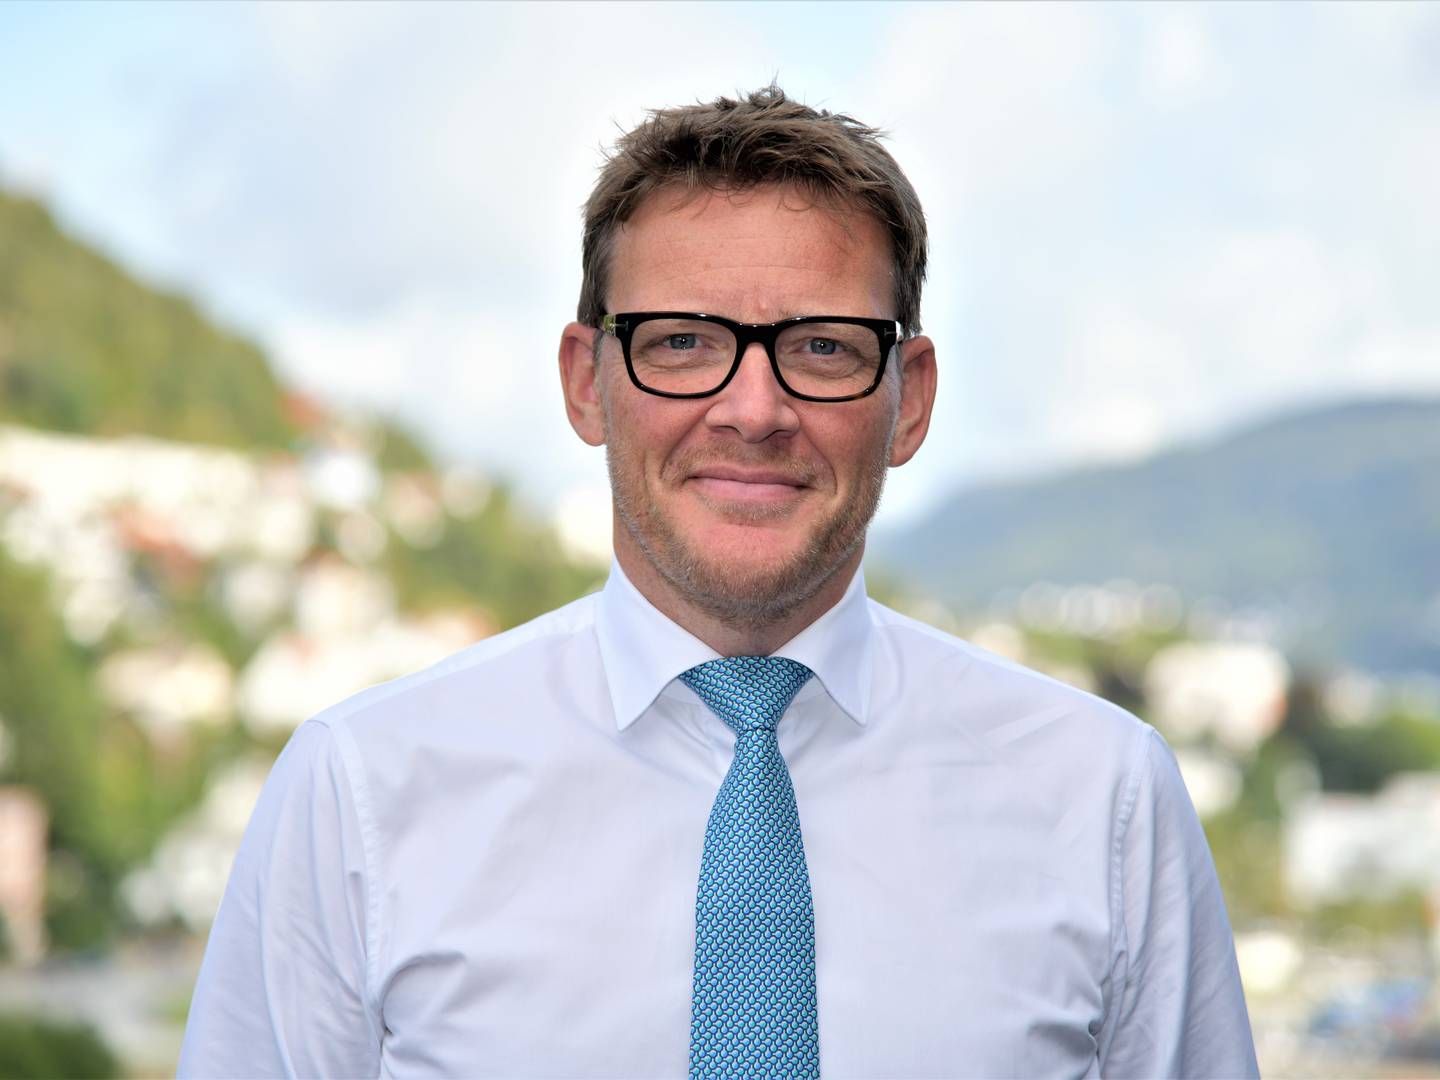 Kristian Mørch is chief executive officer of investment company J. Lauritzen. | Photo: Gunnar Eide/odfjell